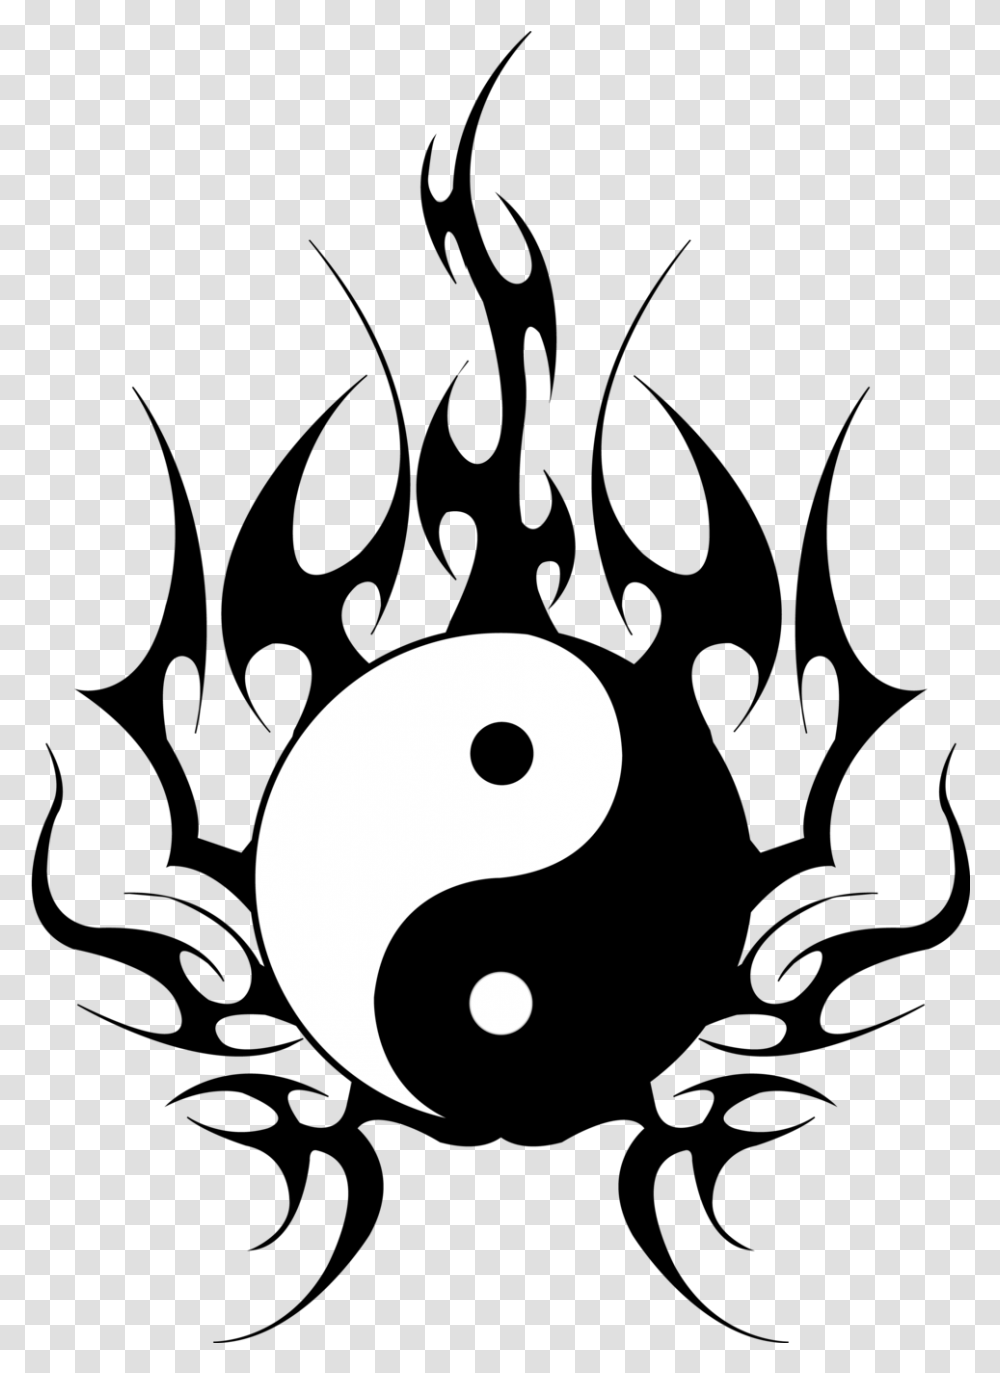 Yin Yang Tribal Design, Moon, Nature, Silhouette, Stencil Transparent Png